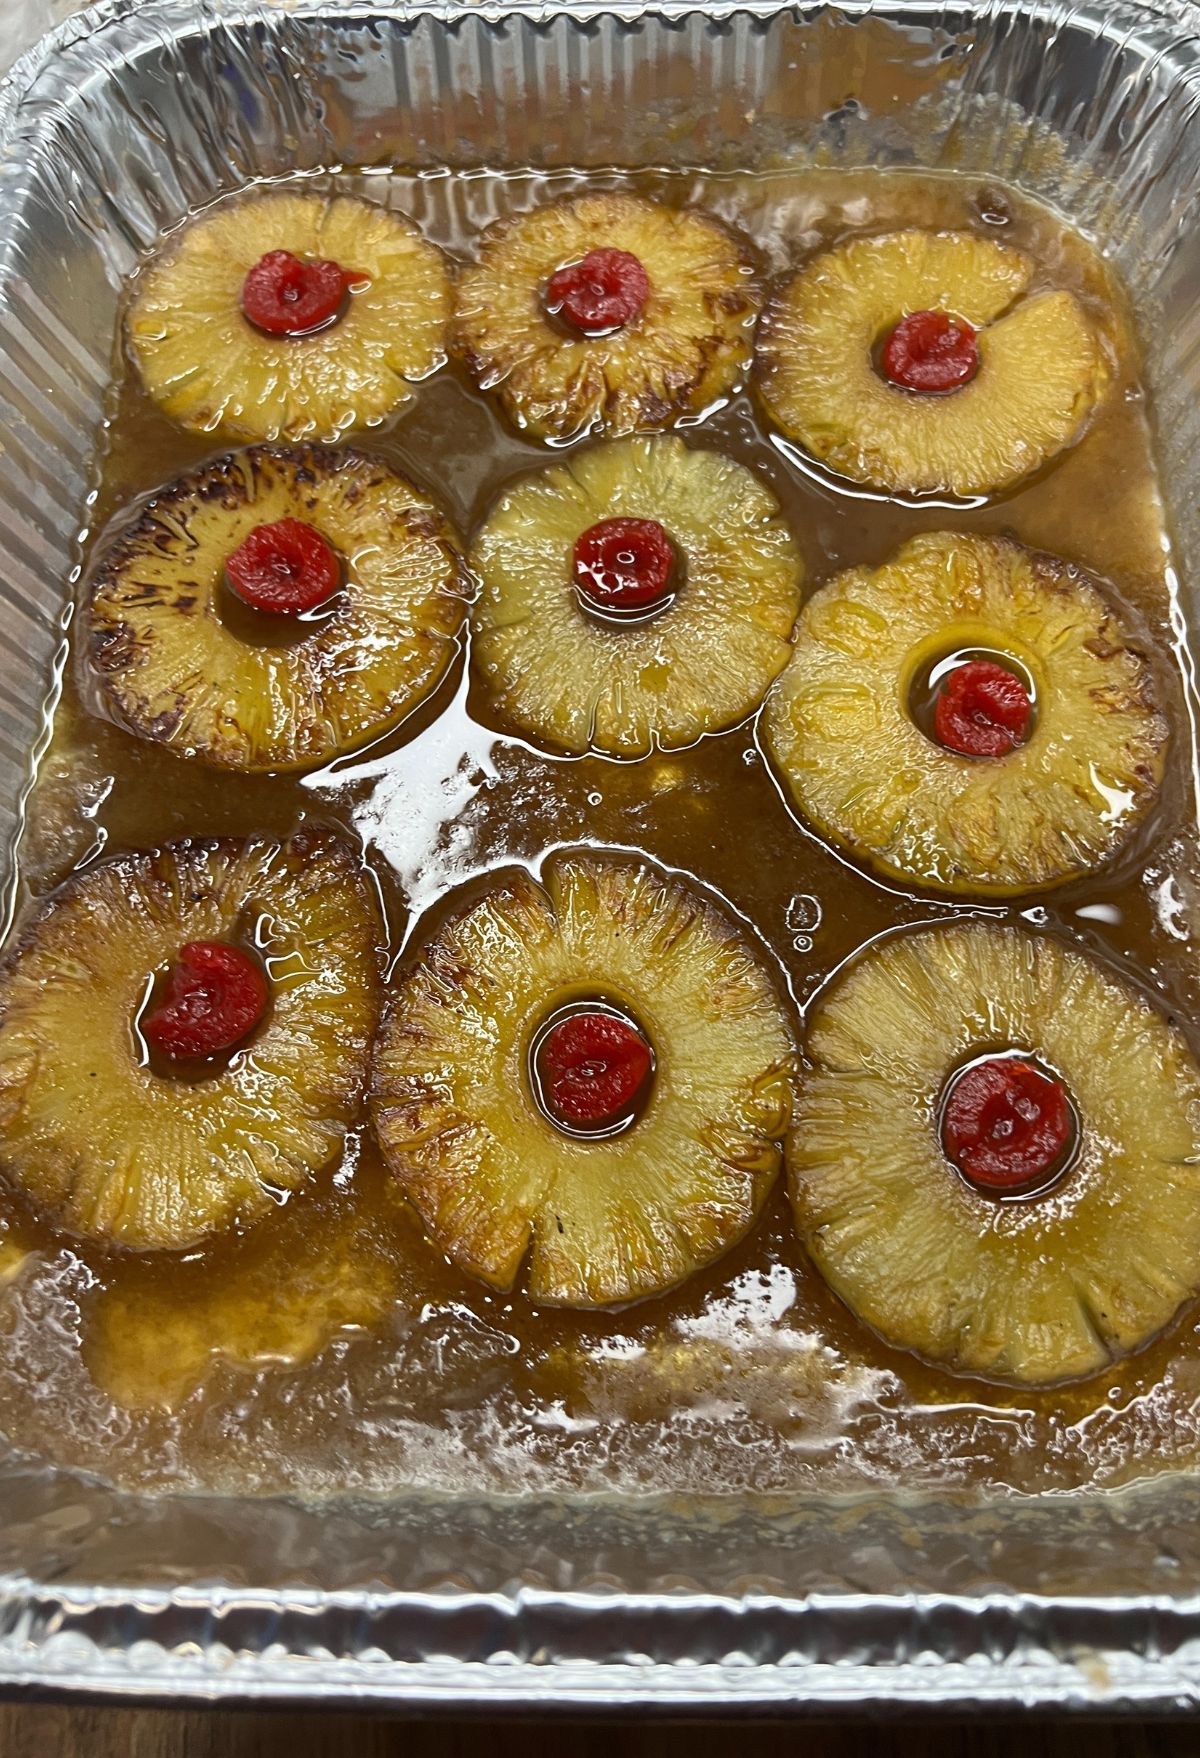 pineapple slices and cherries